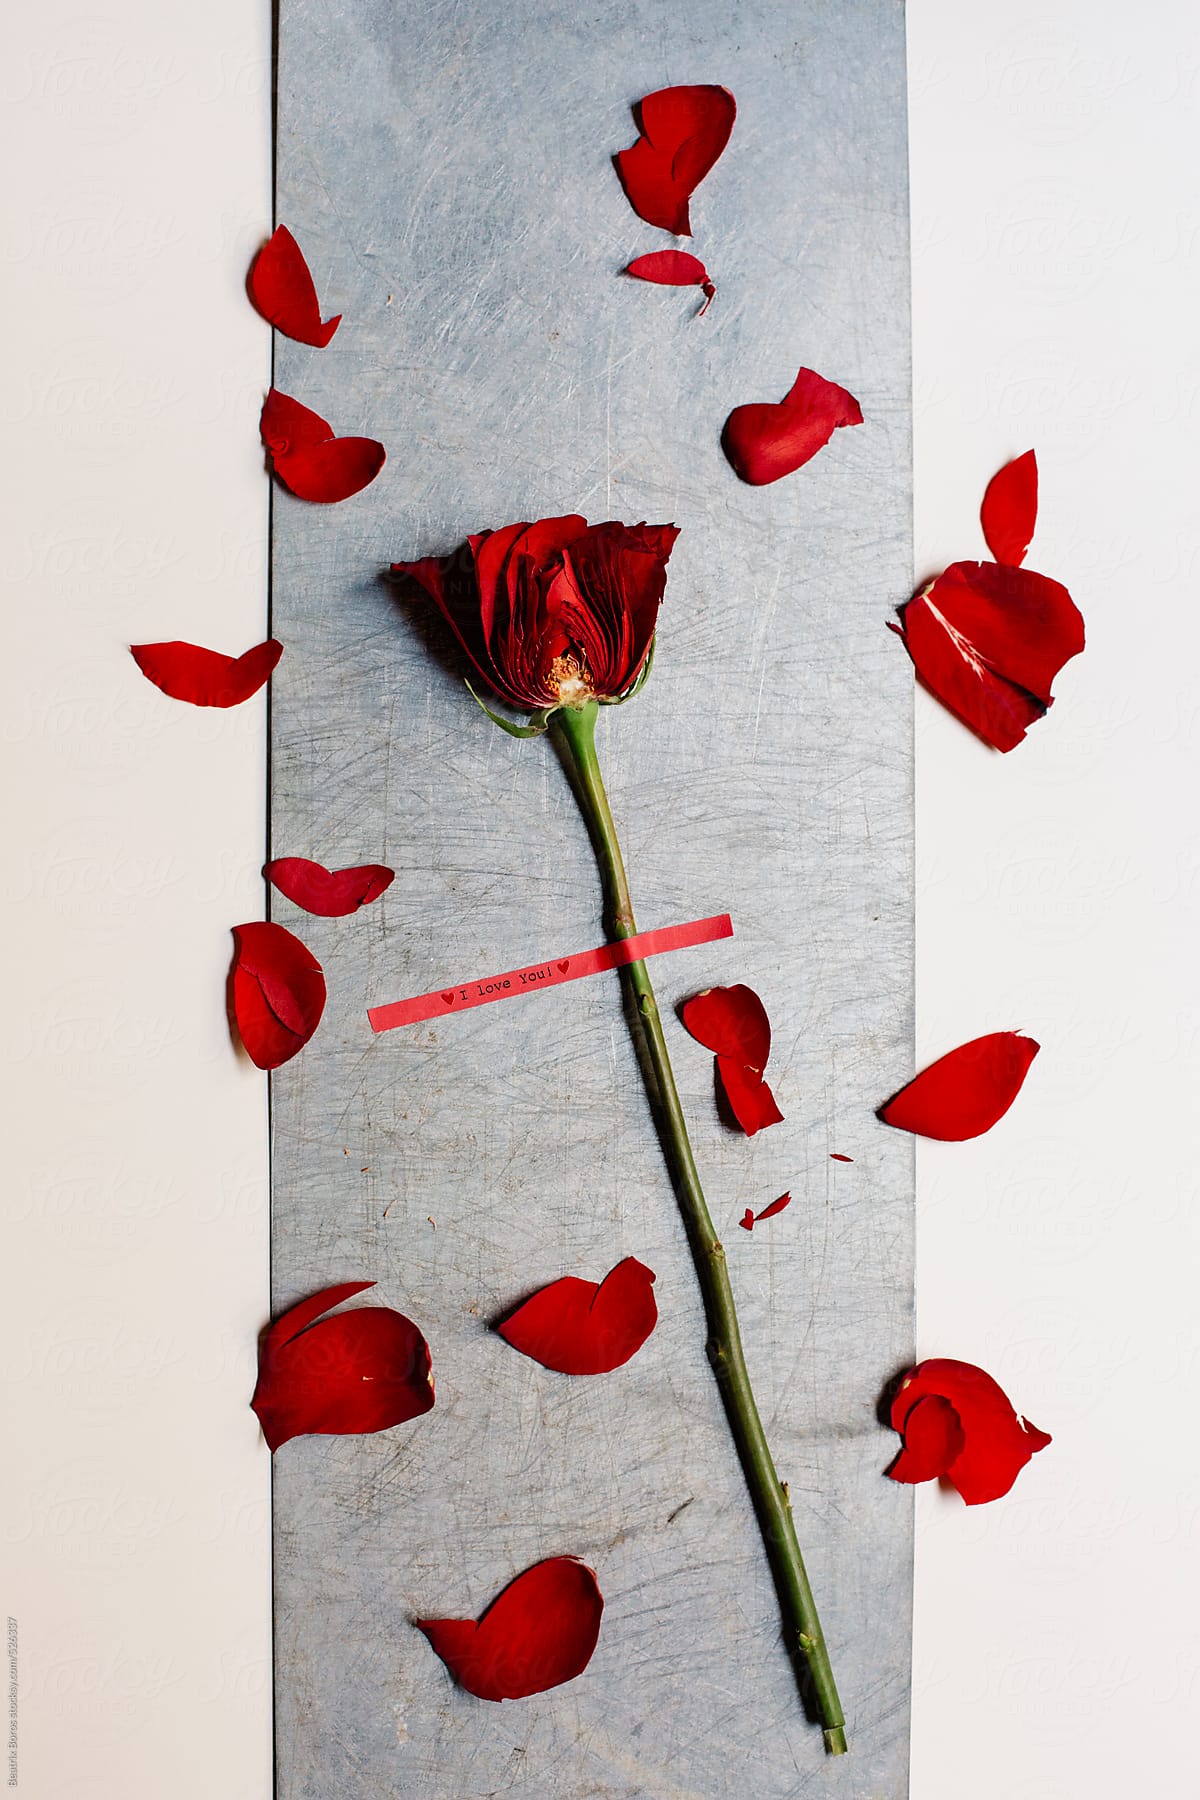 Rose cut in half on a metal surface with a love message